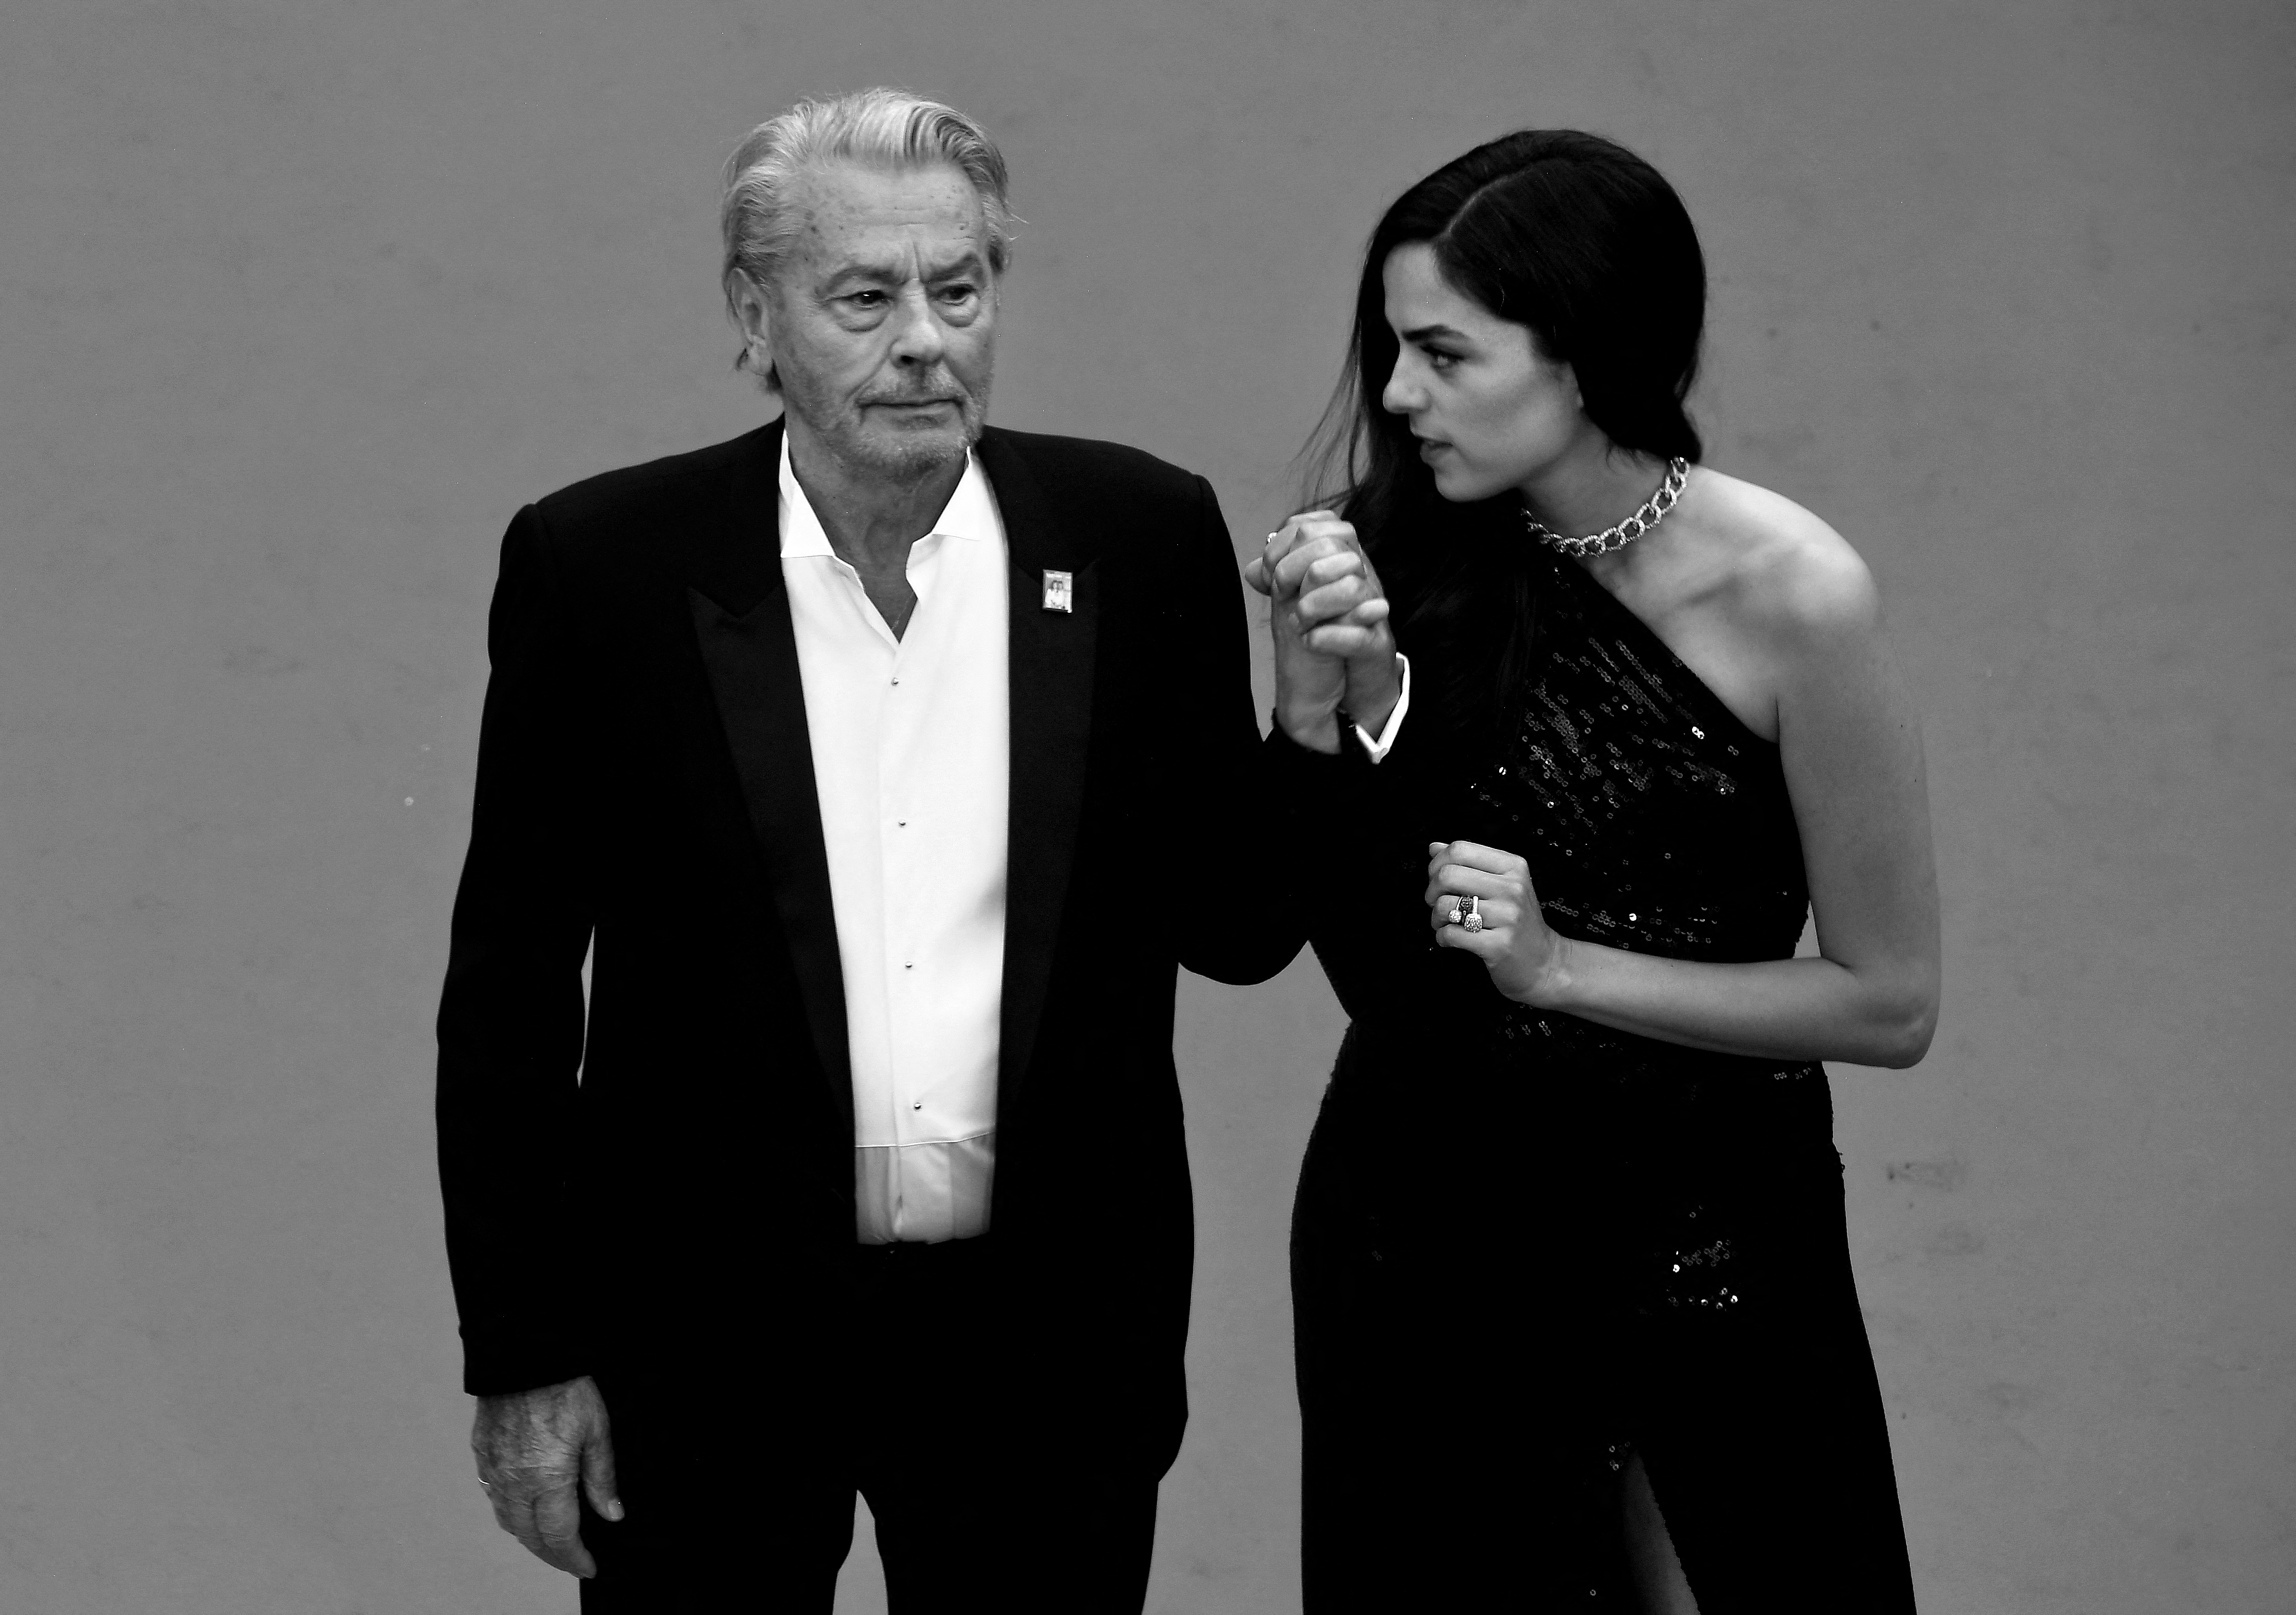 Alain and Anouchka Delon at the 72nd edition of the Cannes Film Festival in Cannes, France on May 19, 2019 | Source: Getty Images